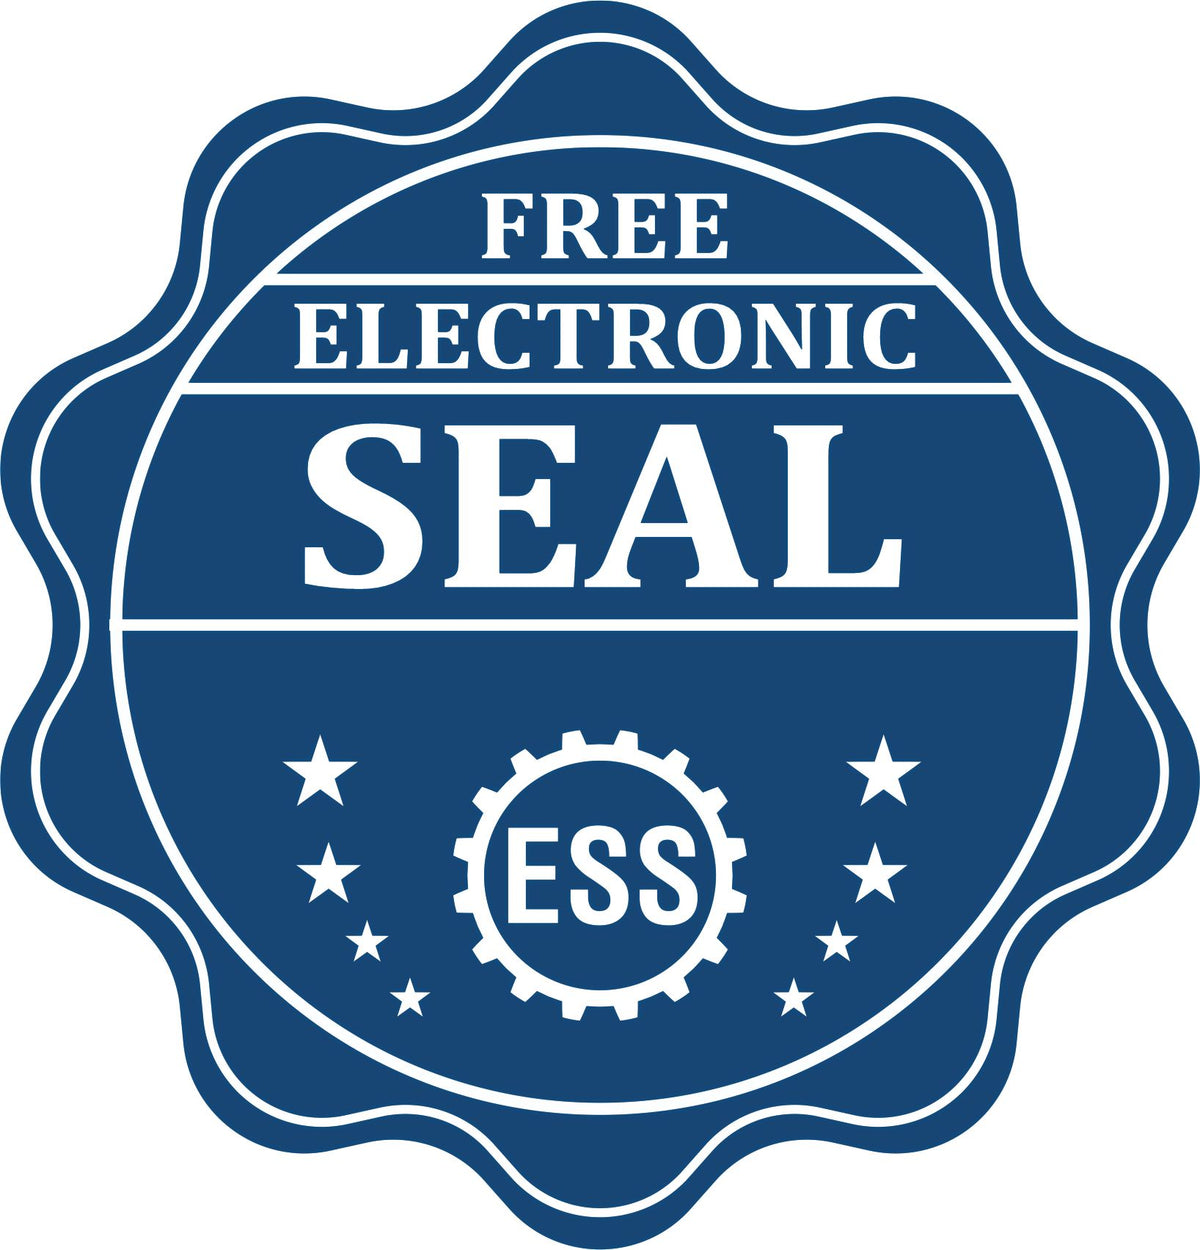 A badge showing a free electronic seal for the State of New Jersey Extended Long Reach Geologist Seal with stars and the ESS gear on the emblem.